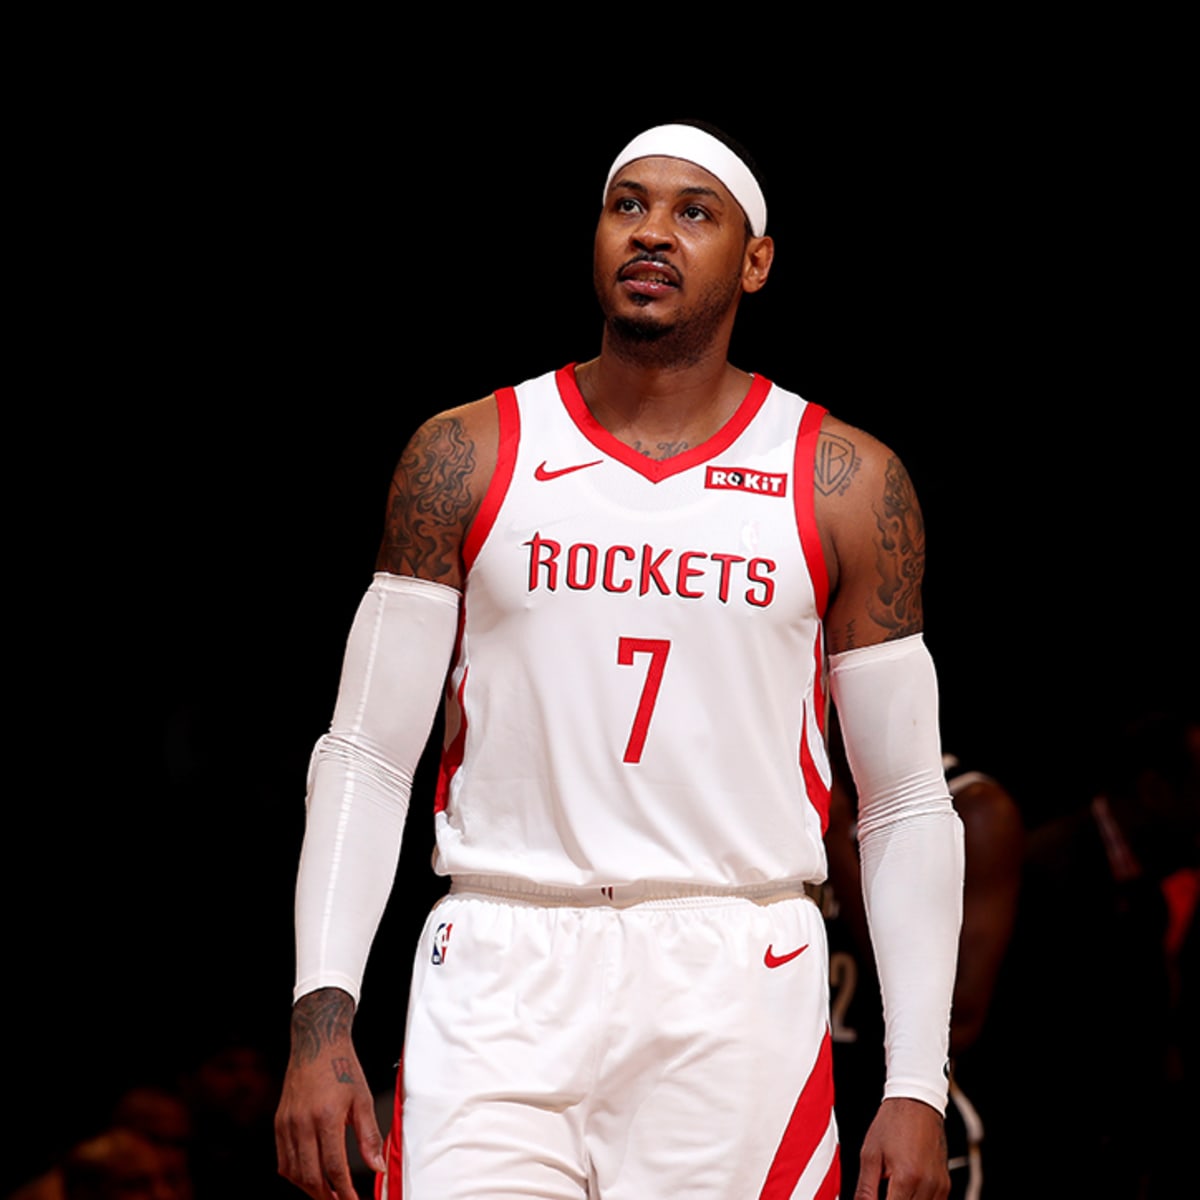 Houston Rockets: Melo not the only problem, removing him is the answer